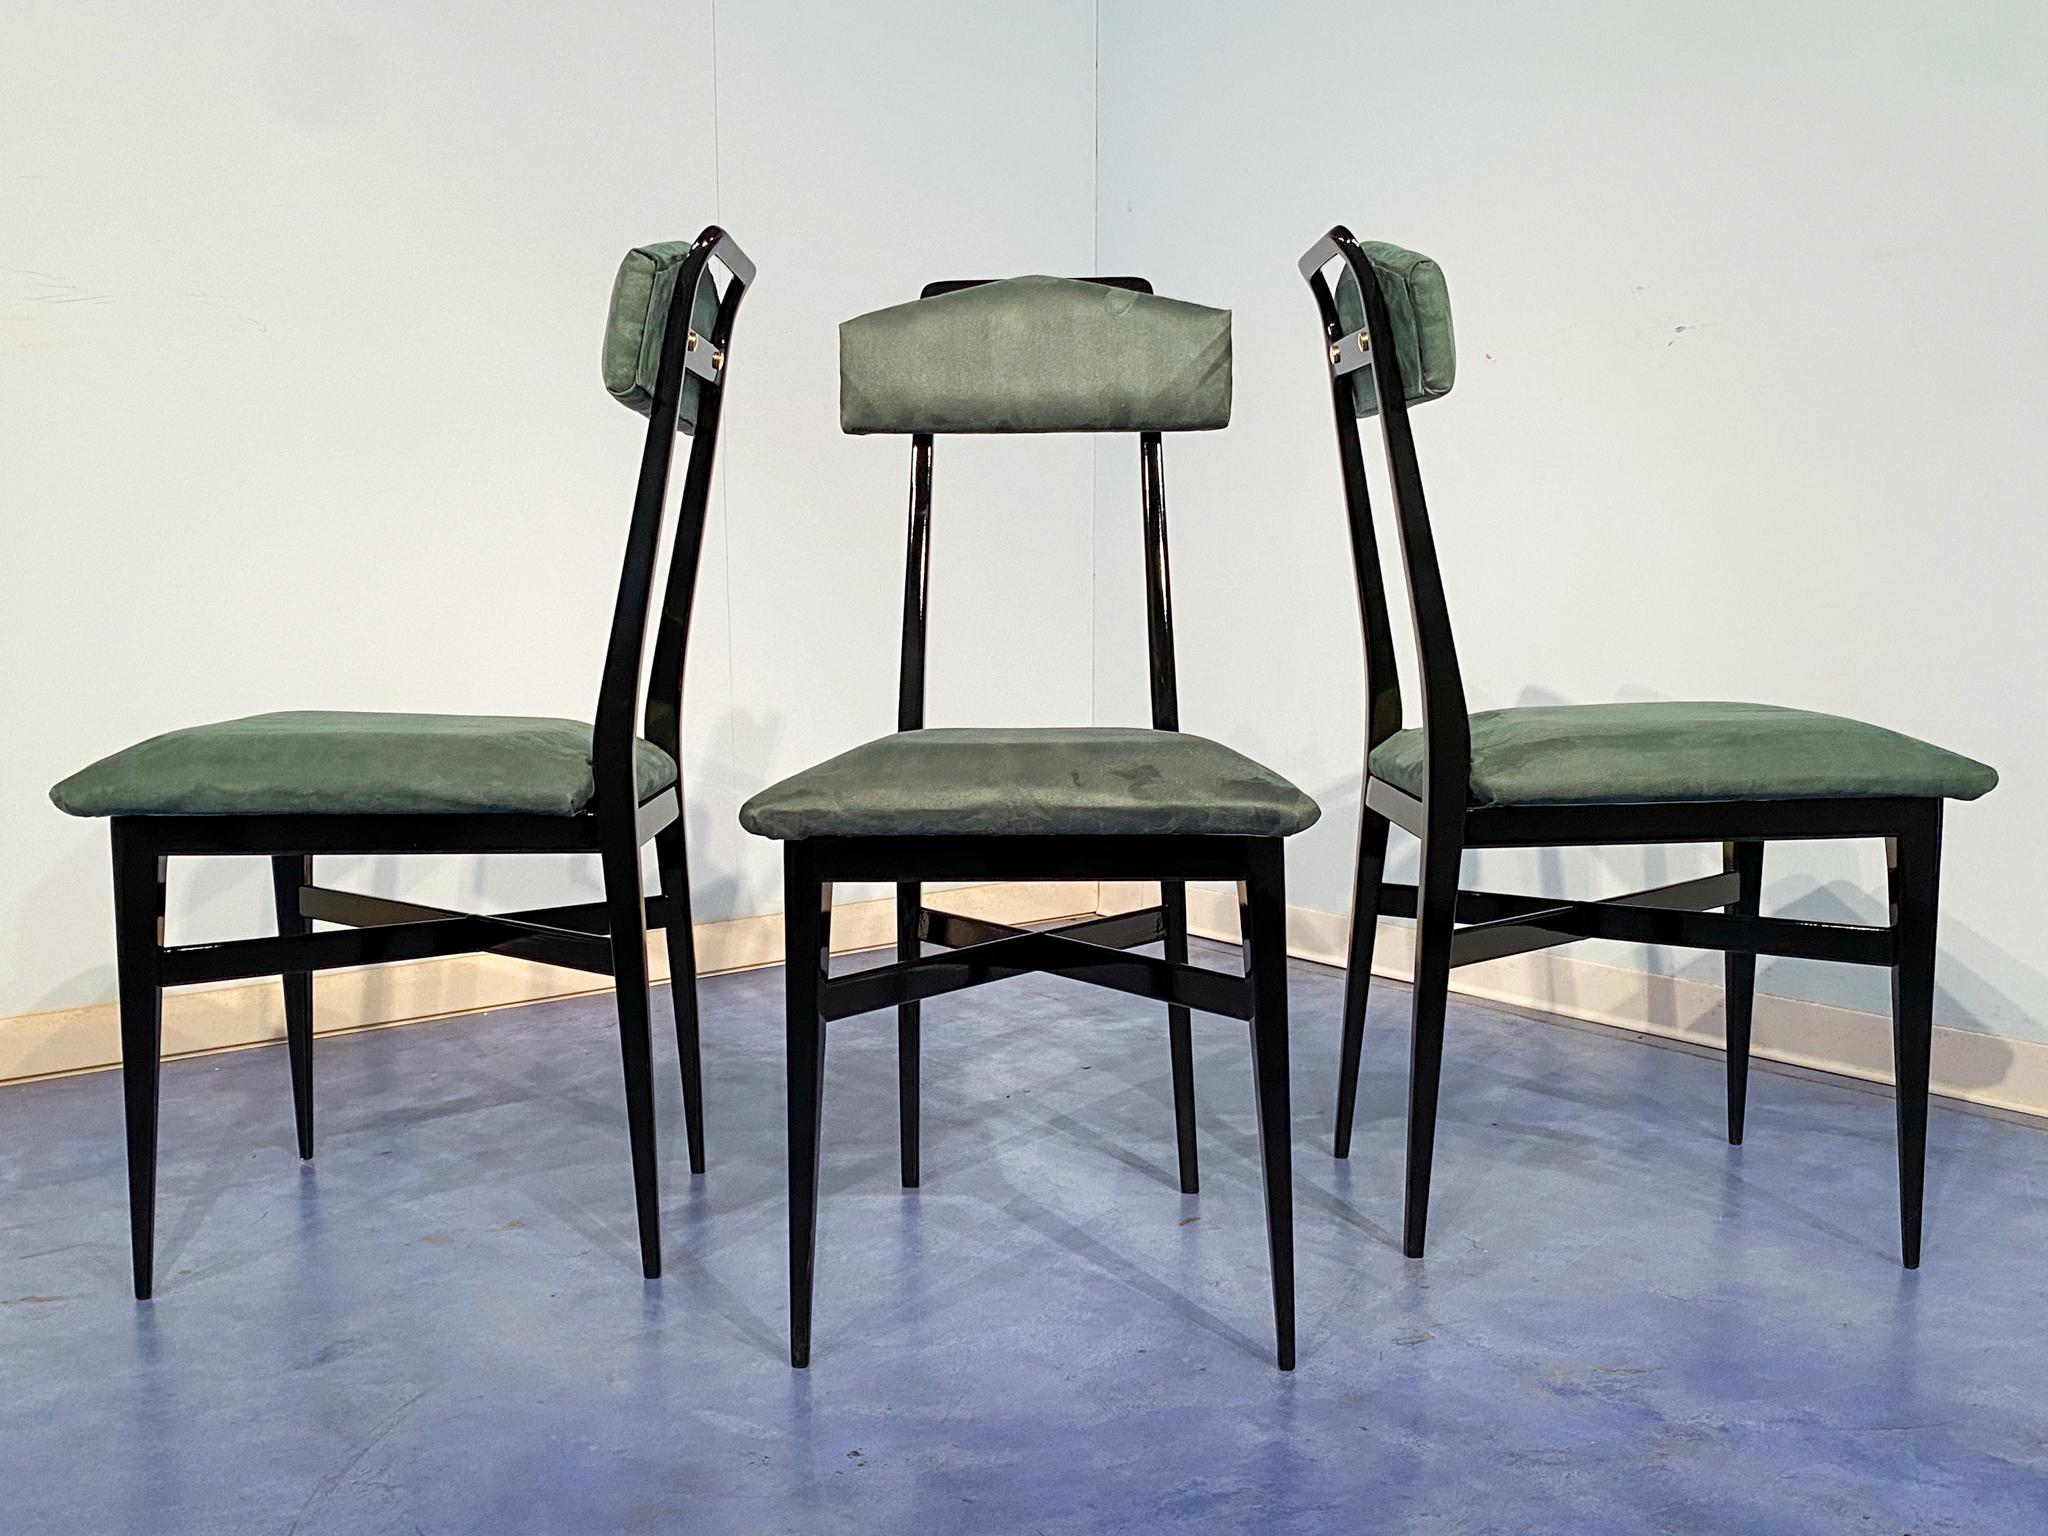 Walnut Italian Mid-Century Black and Green Color Dining Chairs, Set of Six, 1950s For Sale